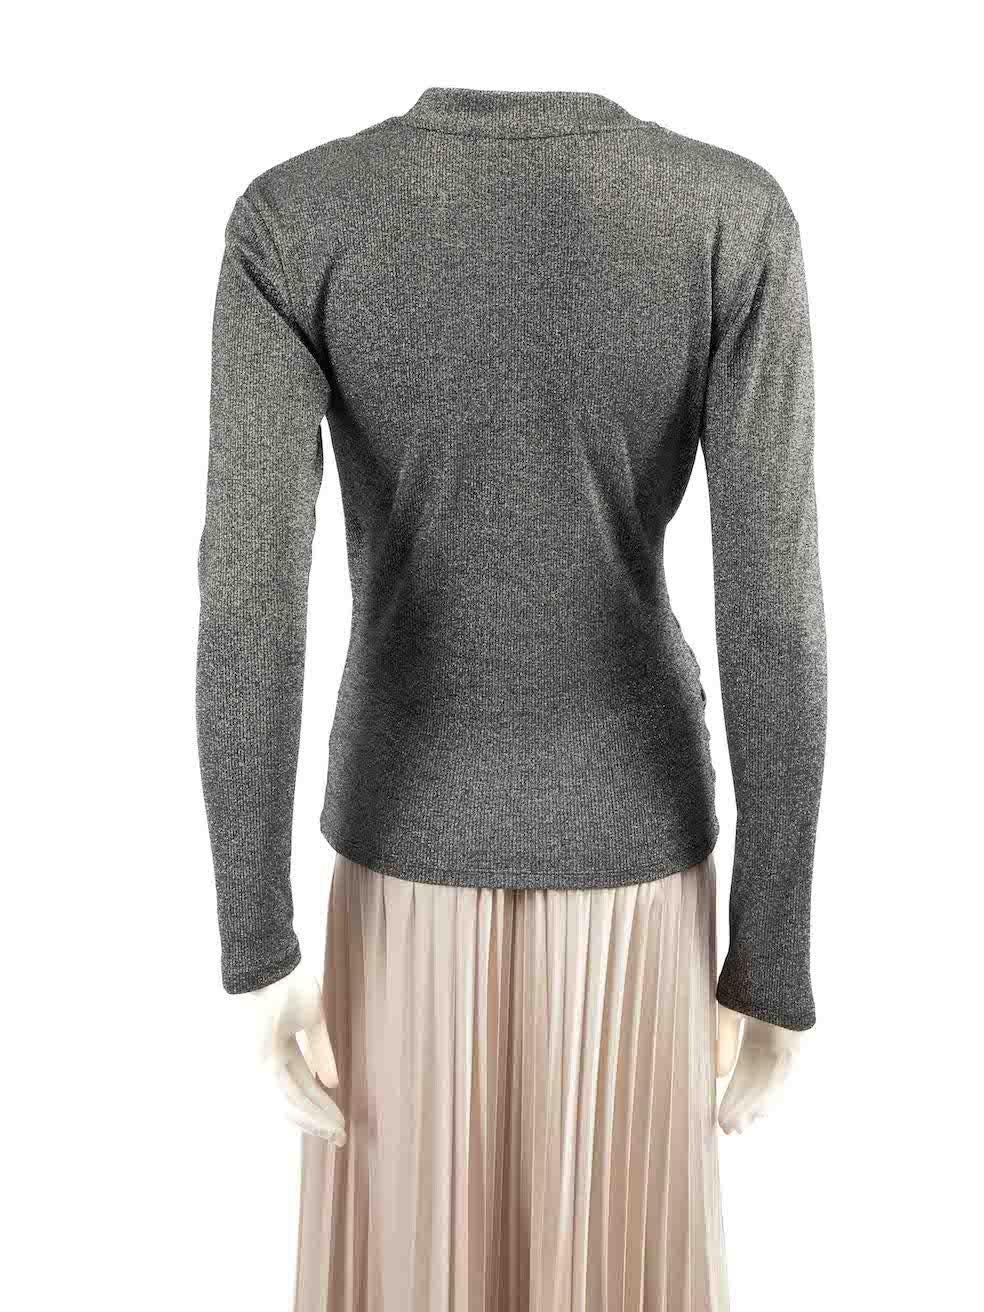 Karl Lagerfeld Silver Glitter Ruched Plunge Top Size S In Good Condition For Sale In London, GB